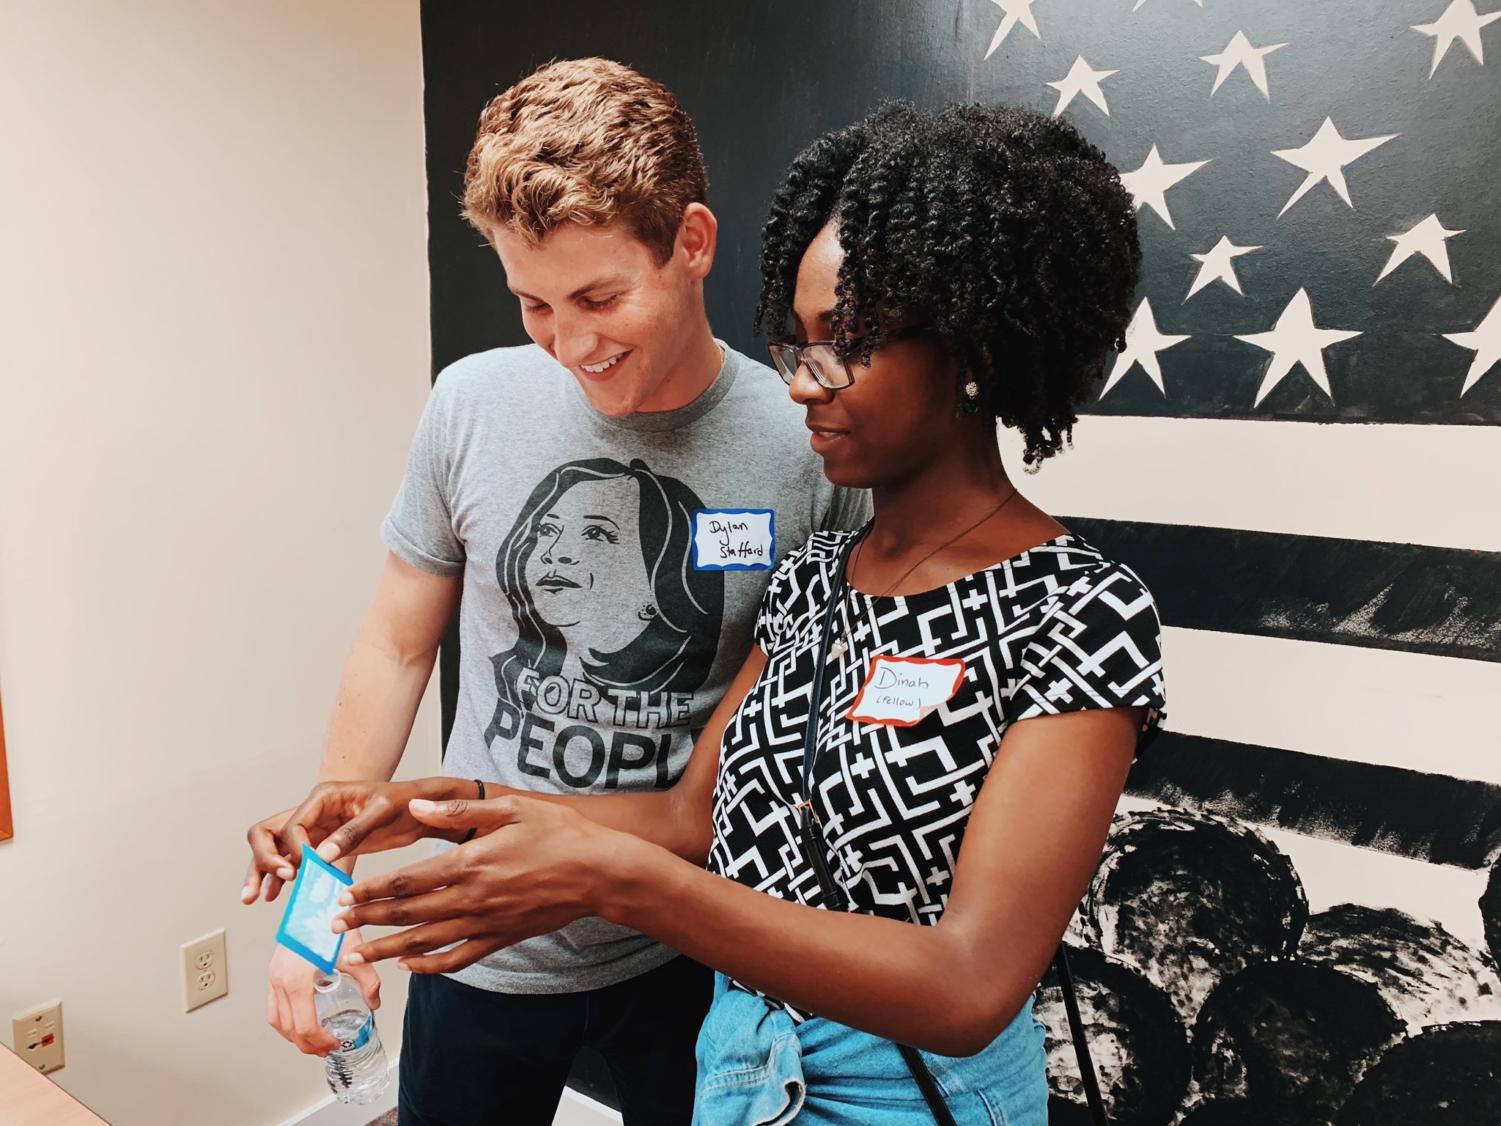 Dylan Stafford ‘20 and Dinah Clottey ‘22 watch as a polaroid photograph develops at the opening for Kamala Harris’ Des Moines field office.